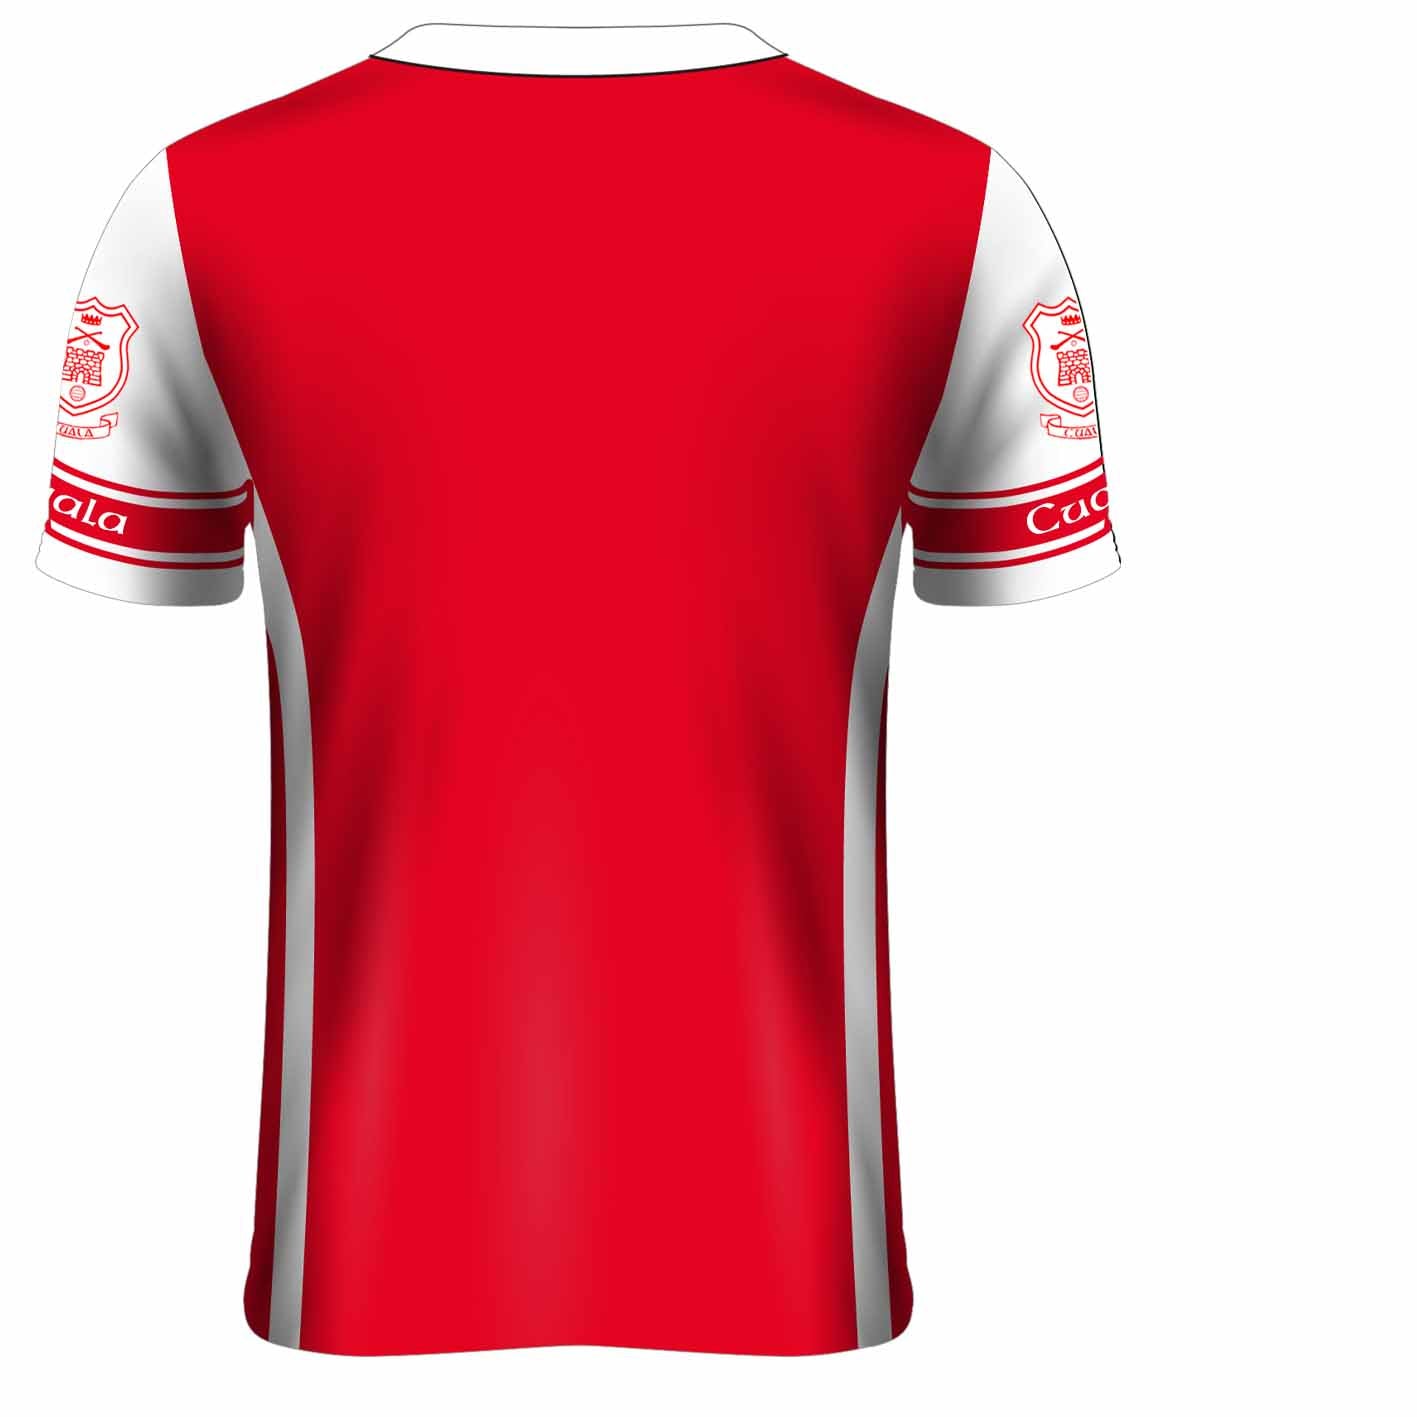 Mc Keever Cuala GAA LGFA Official Jersey - Adult - Red/White